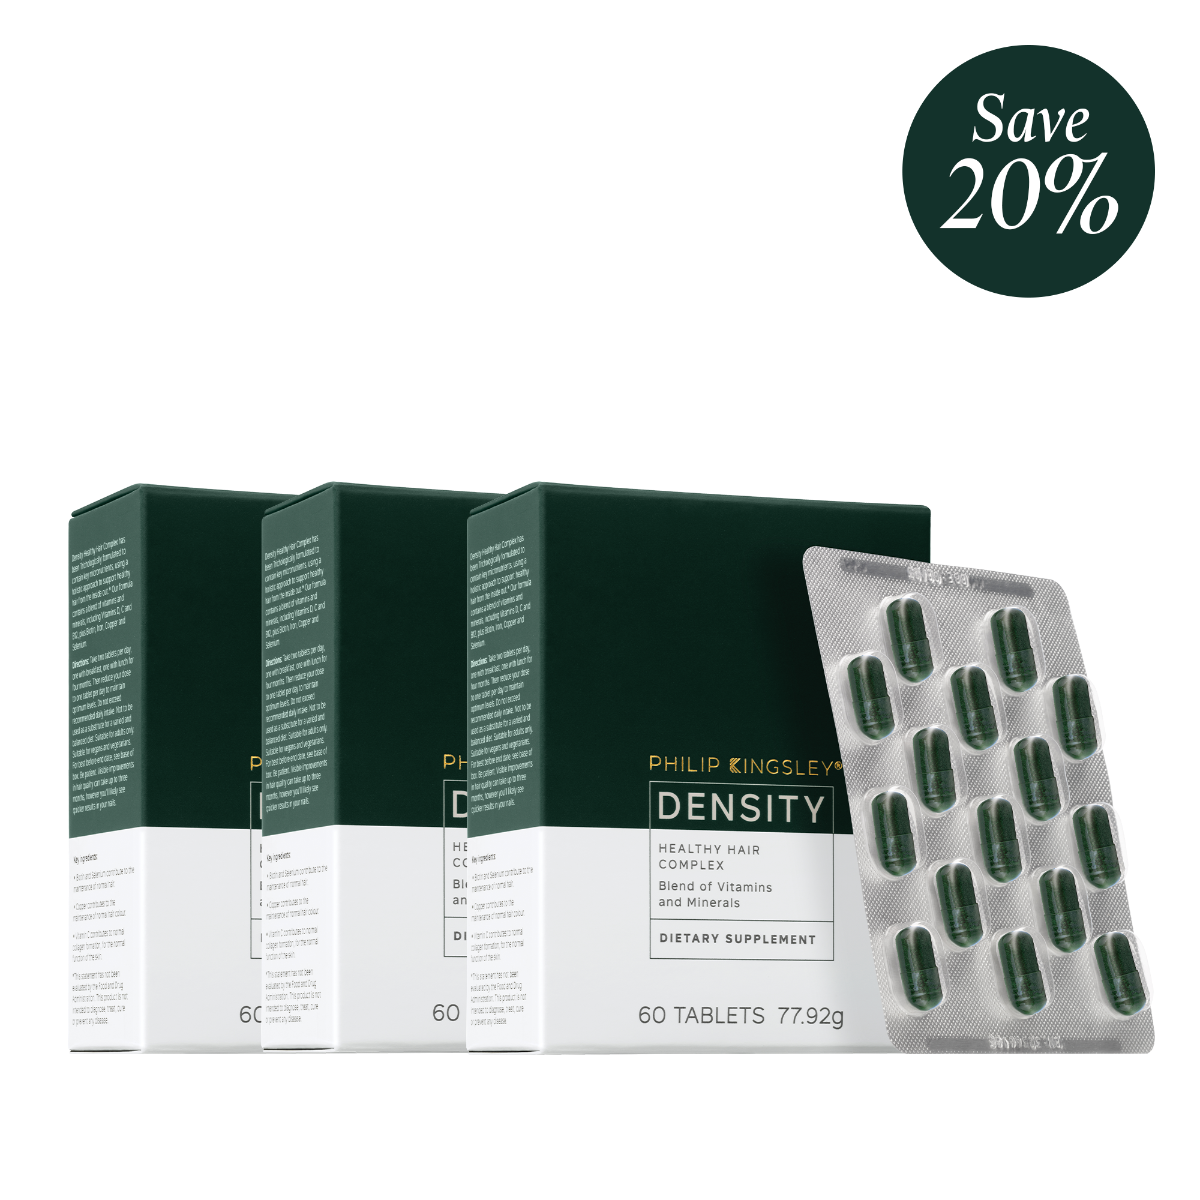 Density Healthy Hair Supplements 6-month Supply Bundle